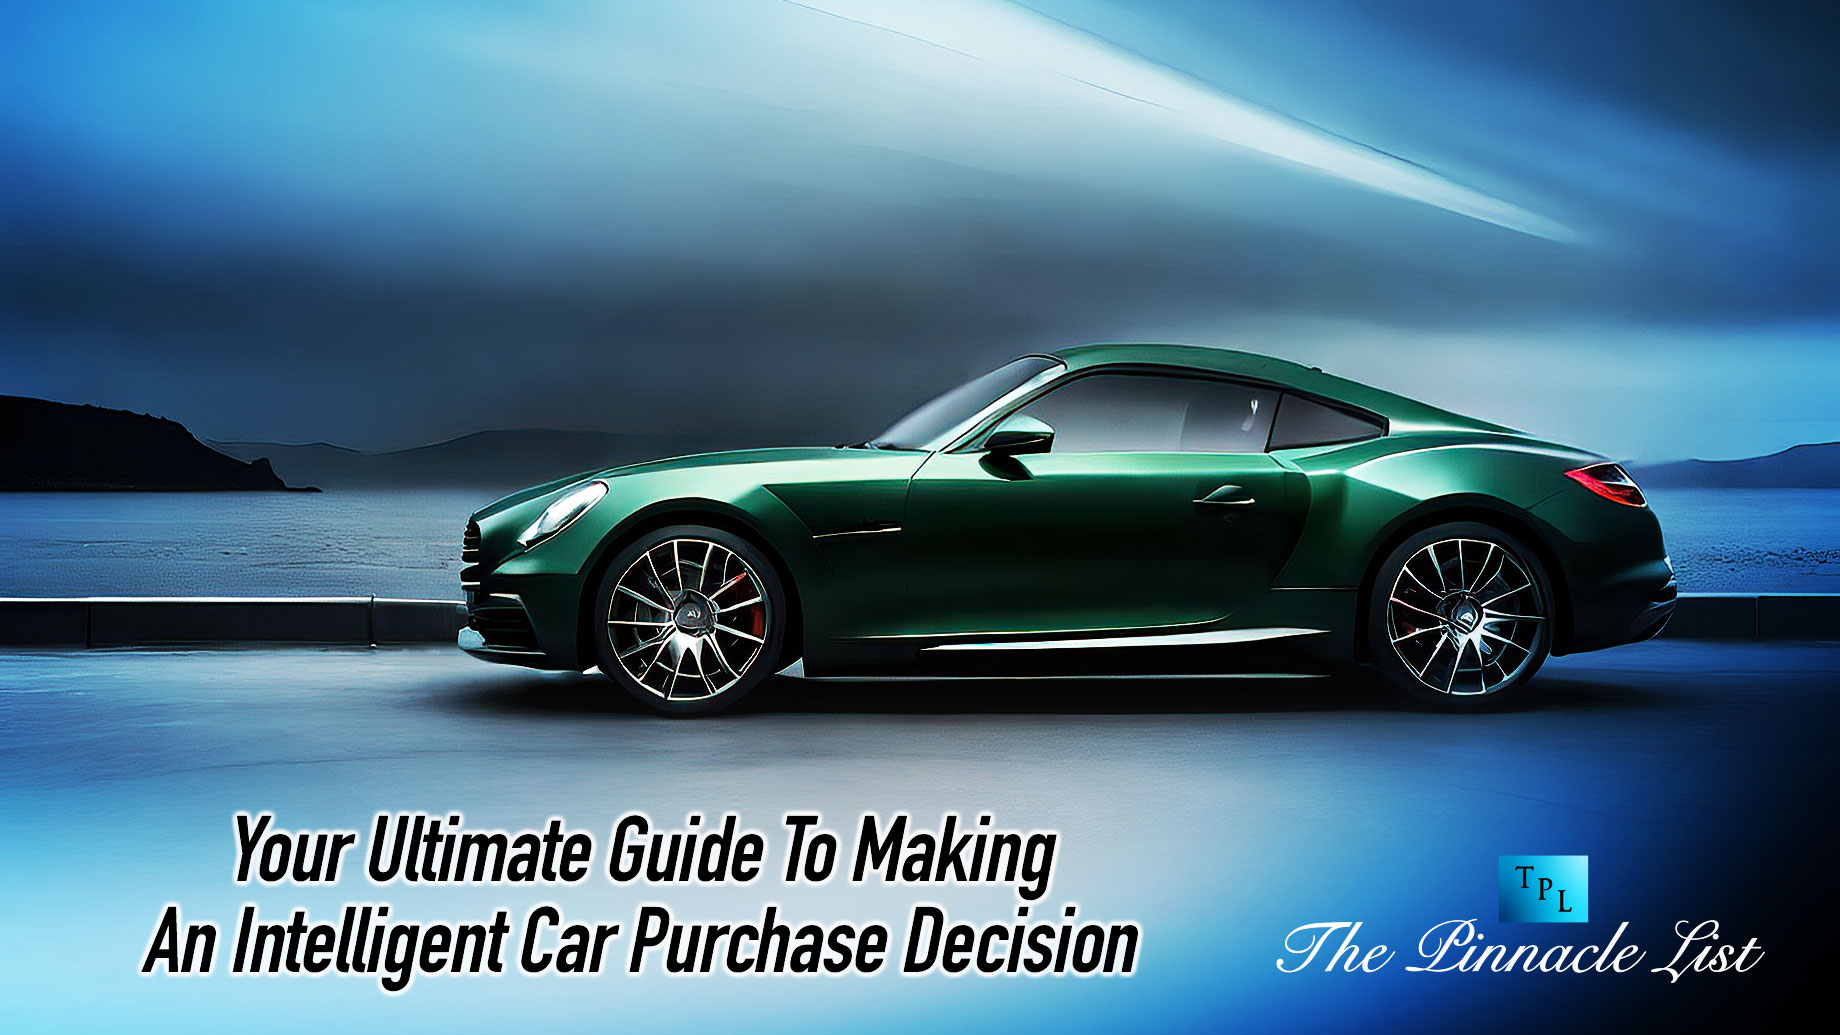 Your Ultimate Guide To Making An Intelligent Car Purchase Decision